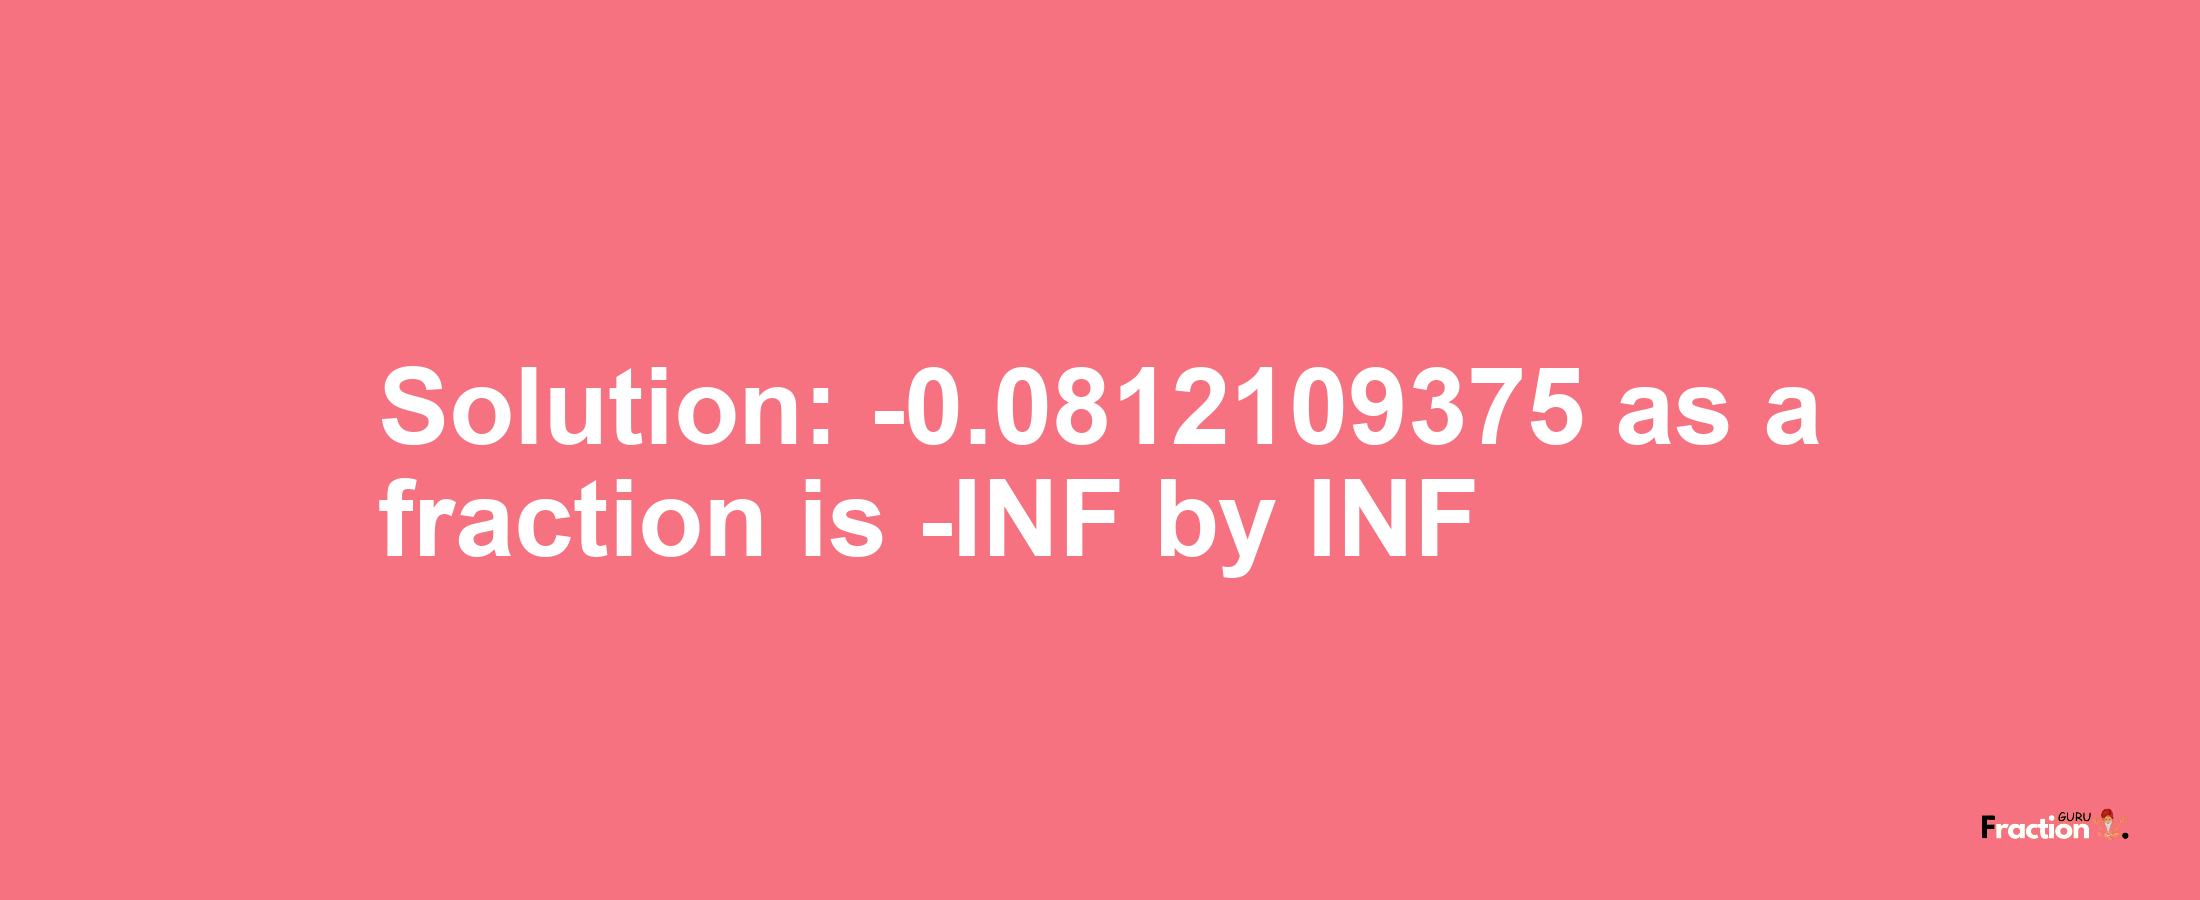 Solution:-0.0812109375 as a fraction is -INF/INF